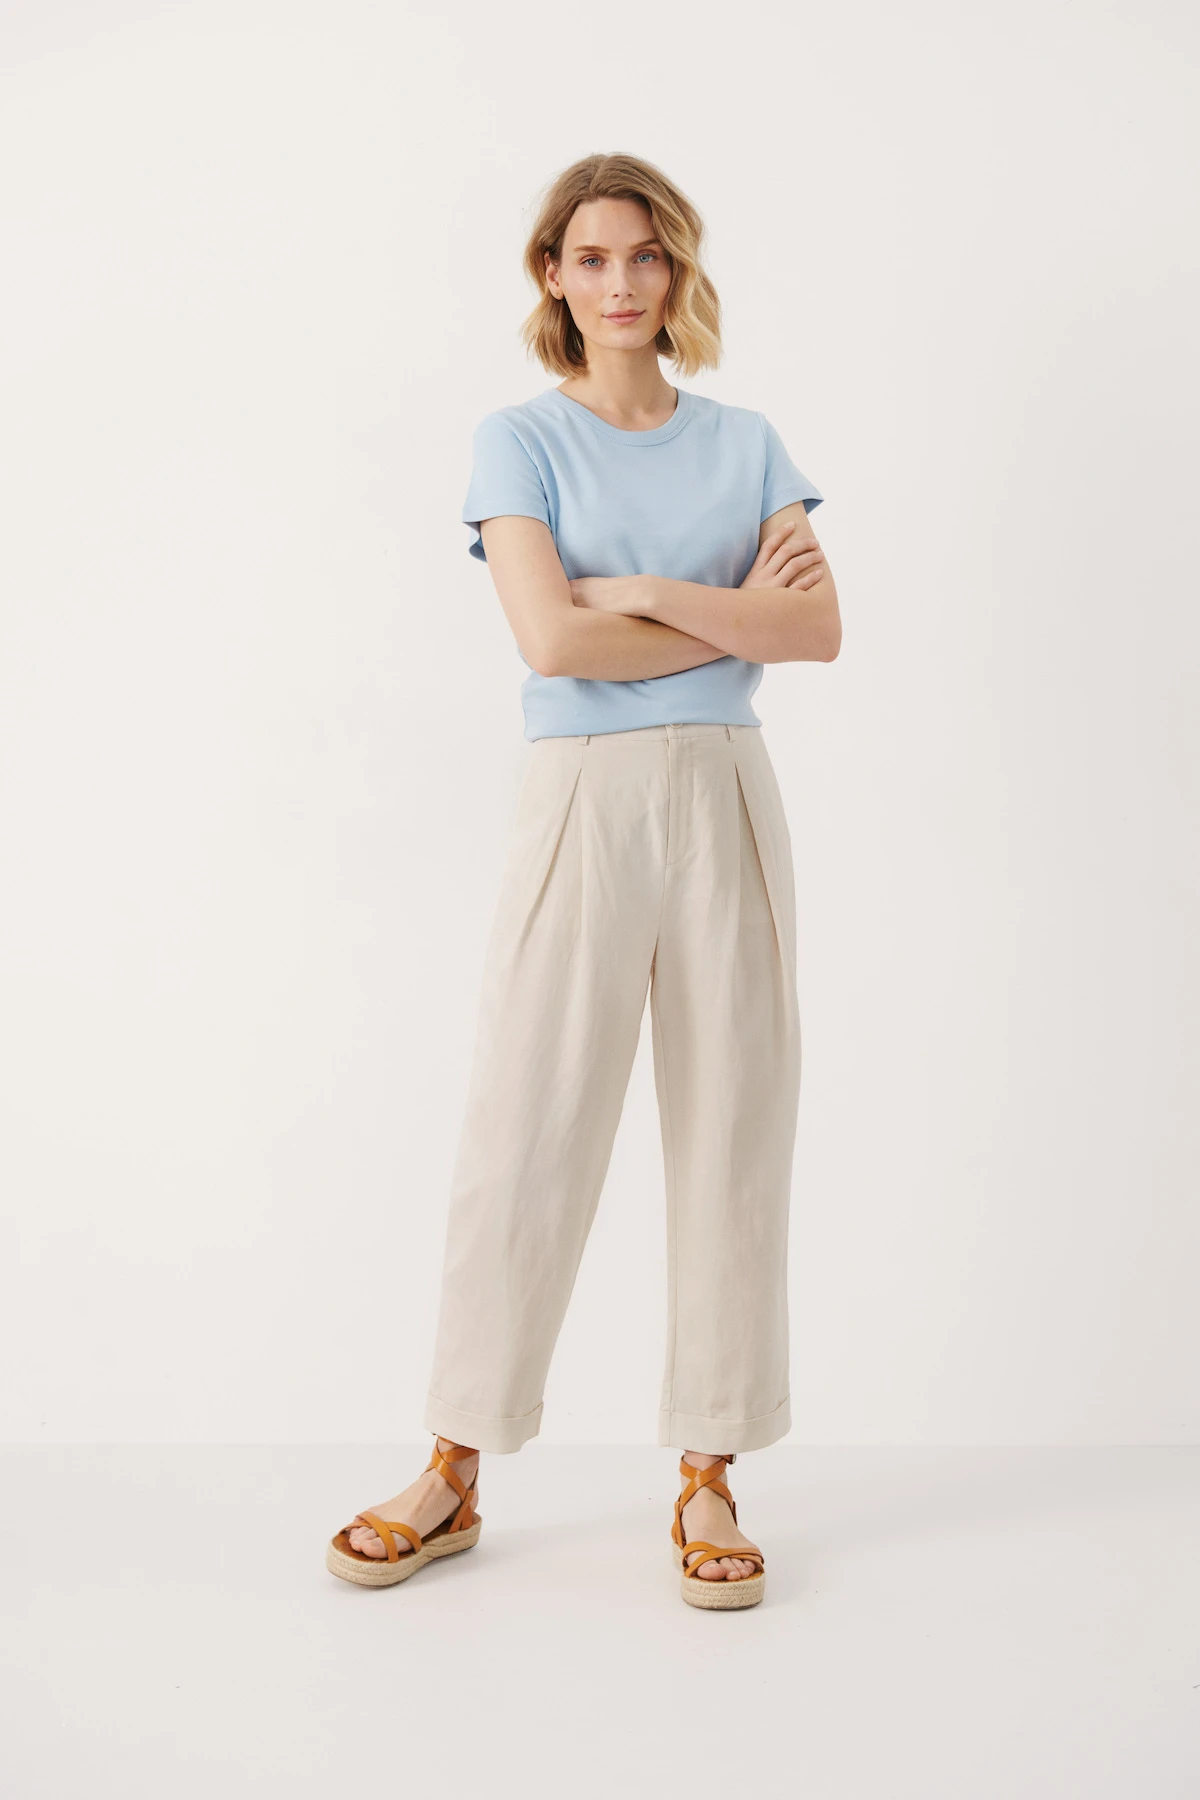 Cheap pants and leggings online - buy trousers on sale here